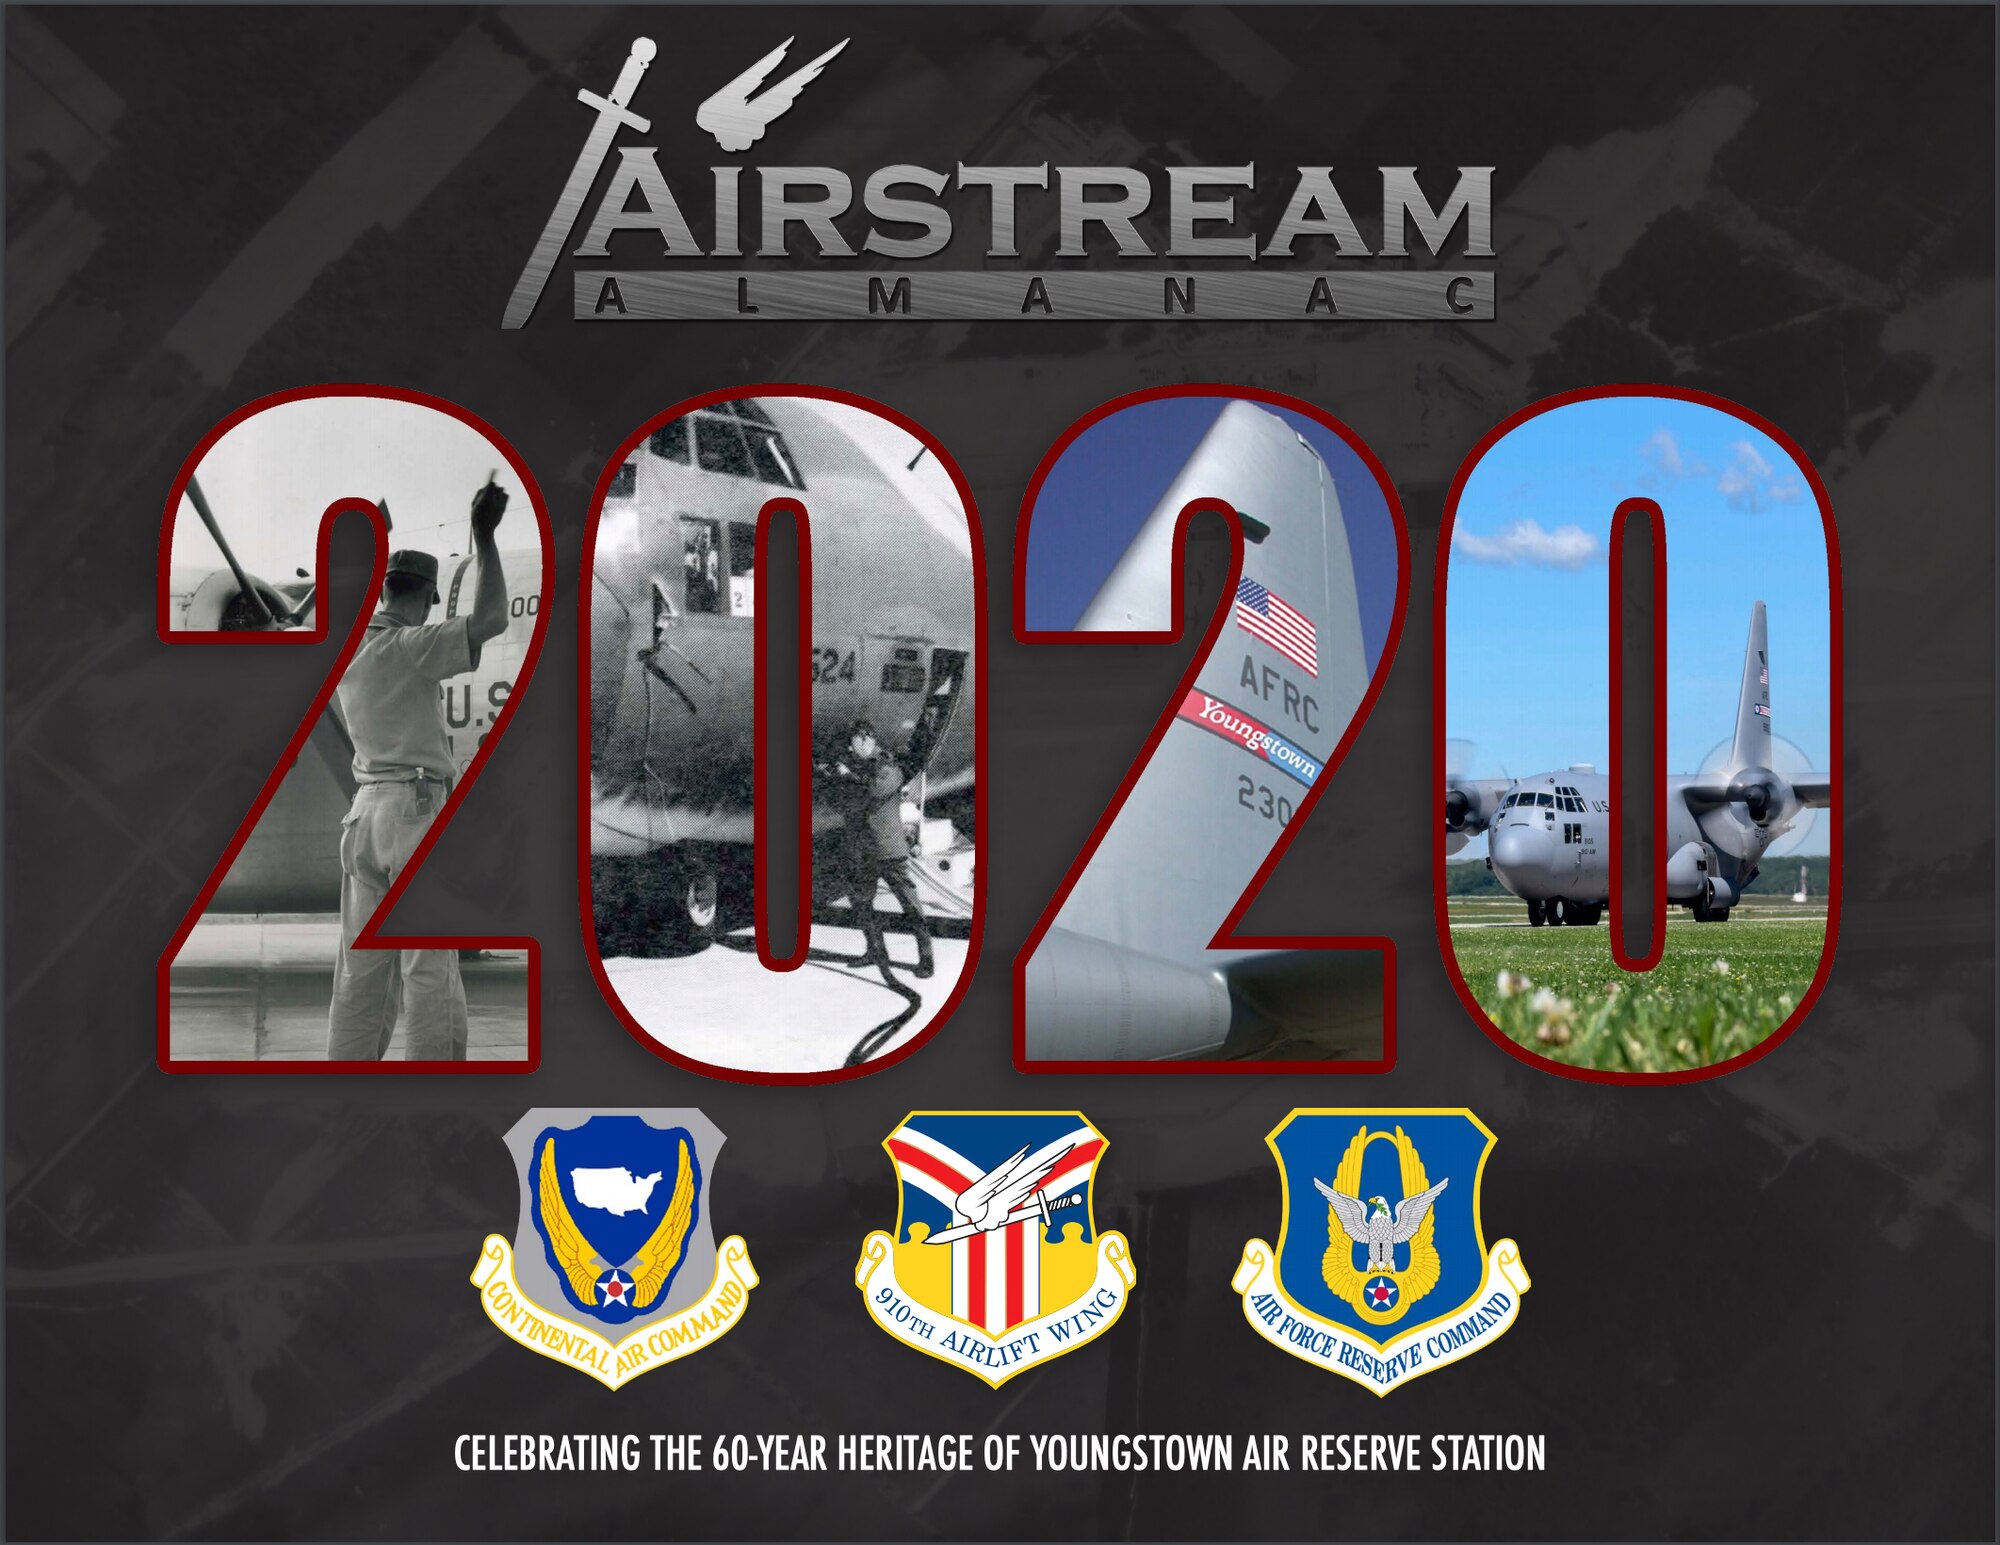 Each year, the 910th Airlift Wing Public Affairs office publishes the Airstream Almanac, a 32-page magazine featuring stories, photos and information from the previous year. The digital version of the 2020 Airstream Almanac is now available for viewing and download online. Use the link on this page to view the new magazine.